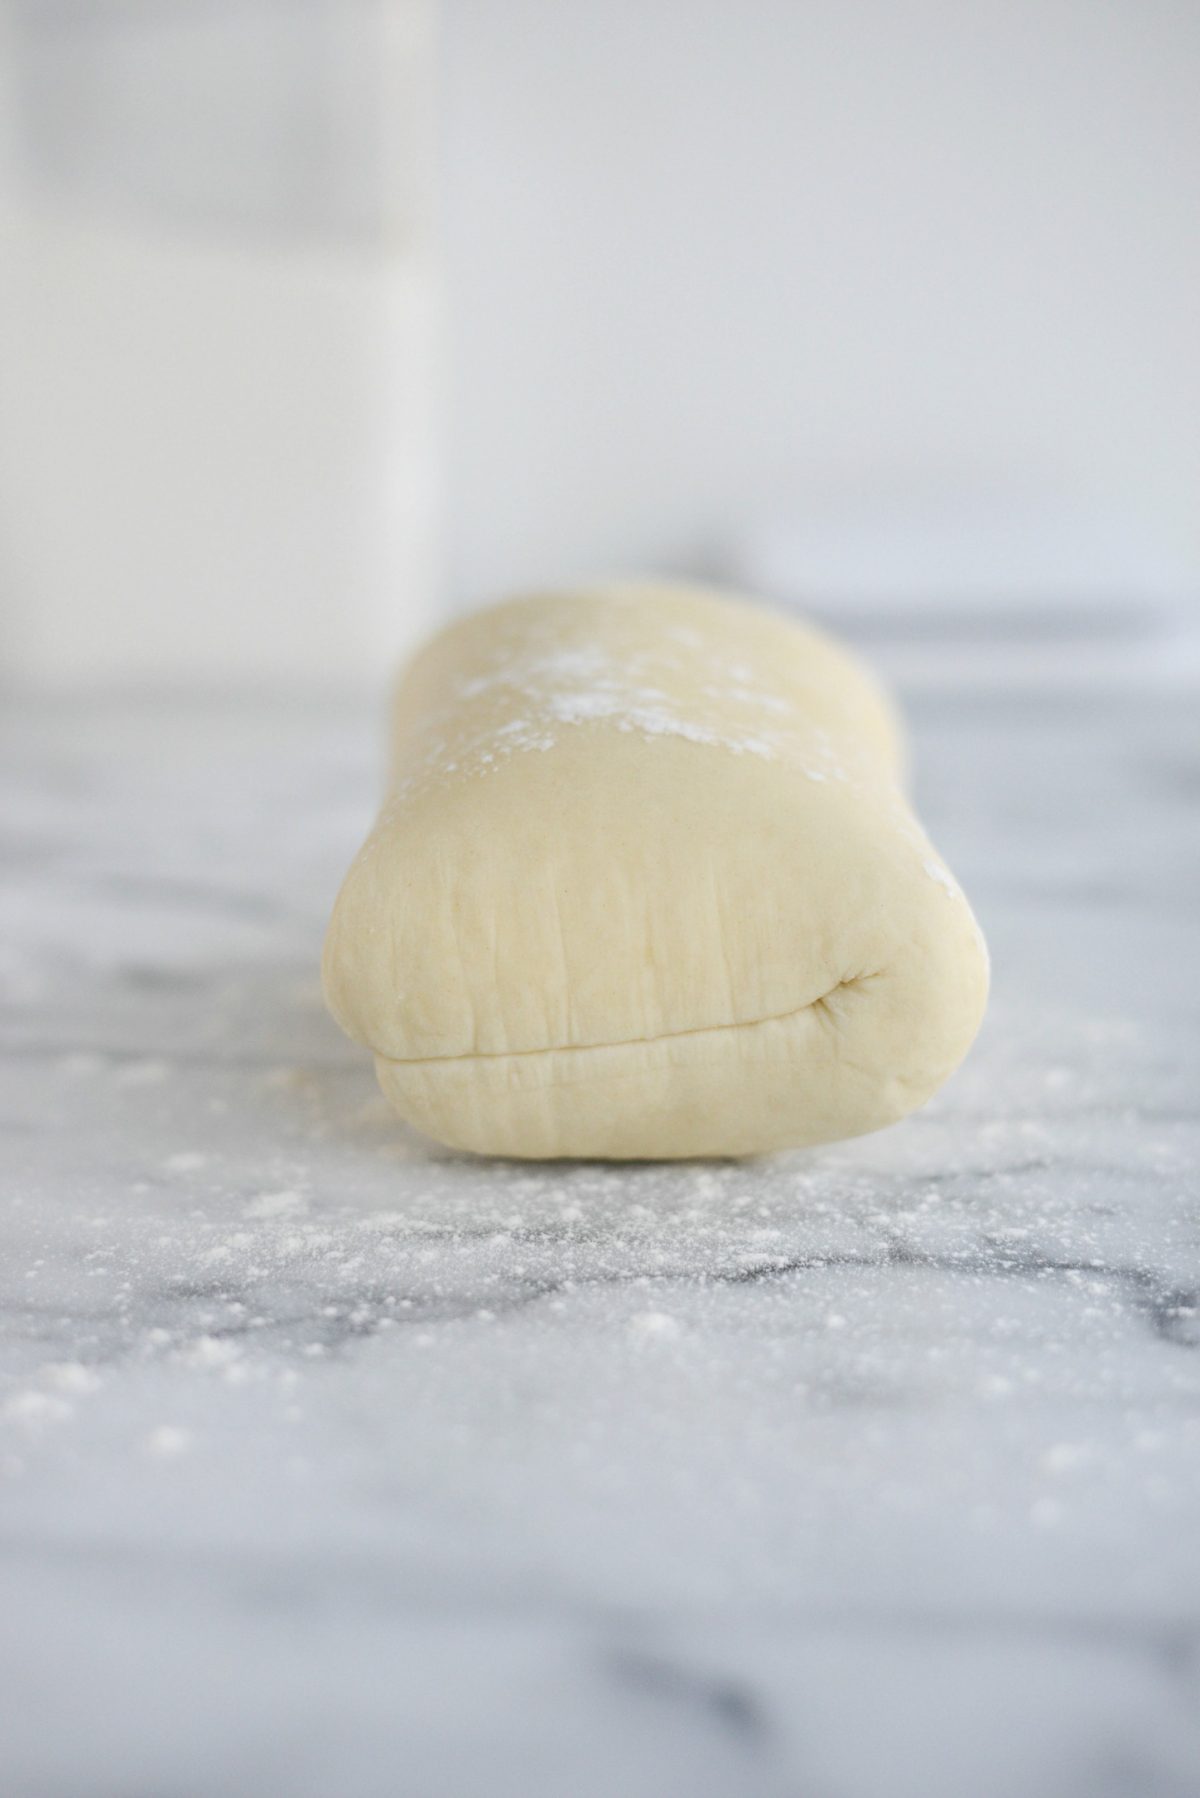 Once the dough has chilled, on a lightly floured surface,